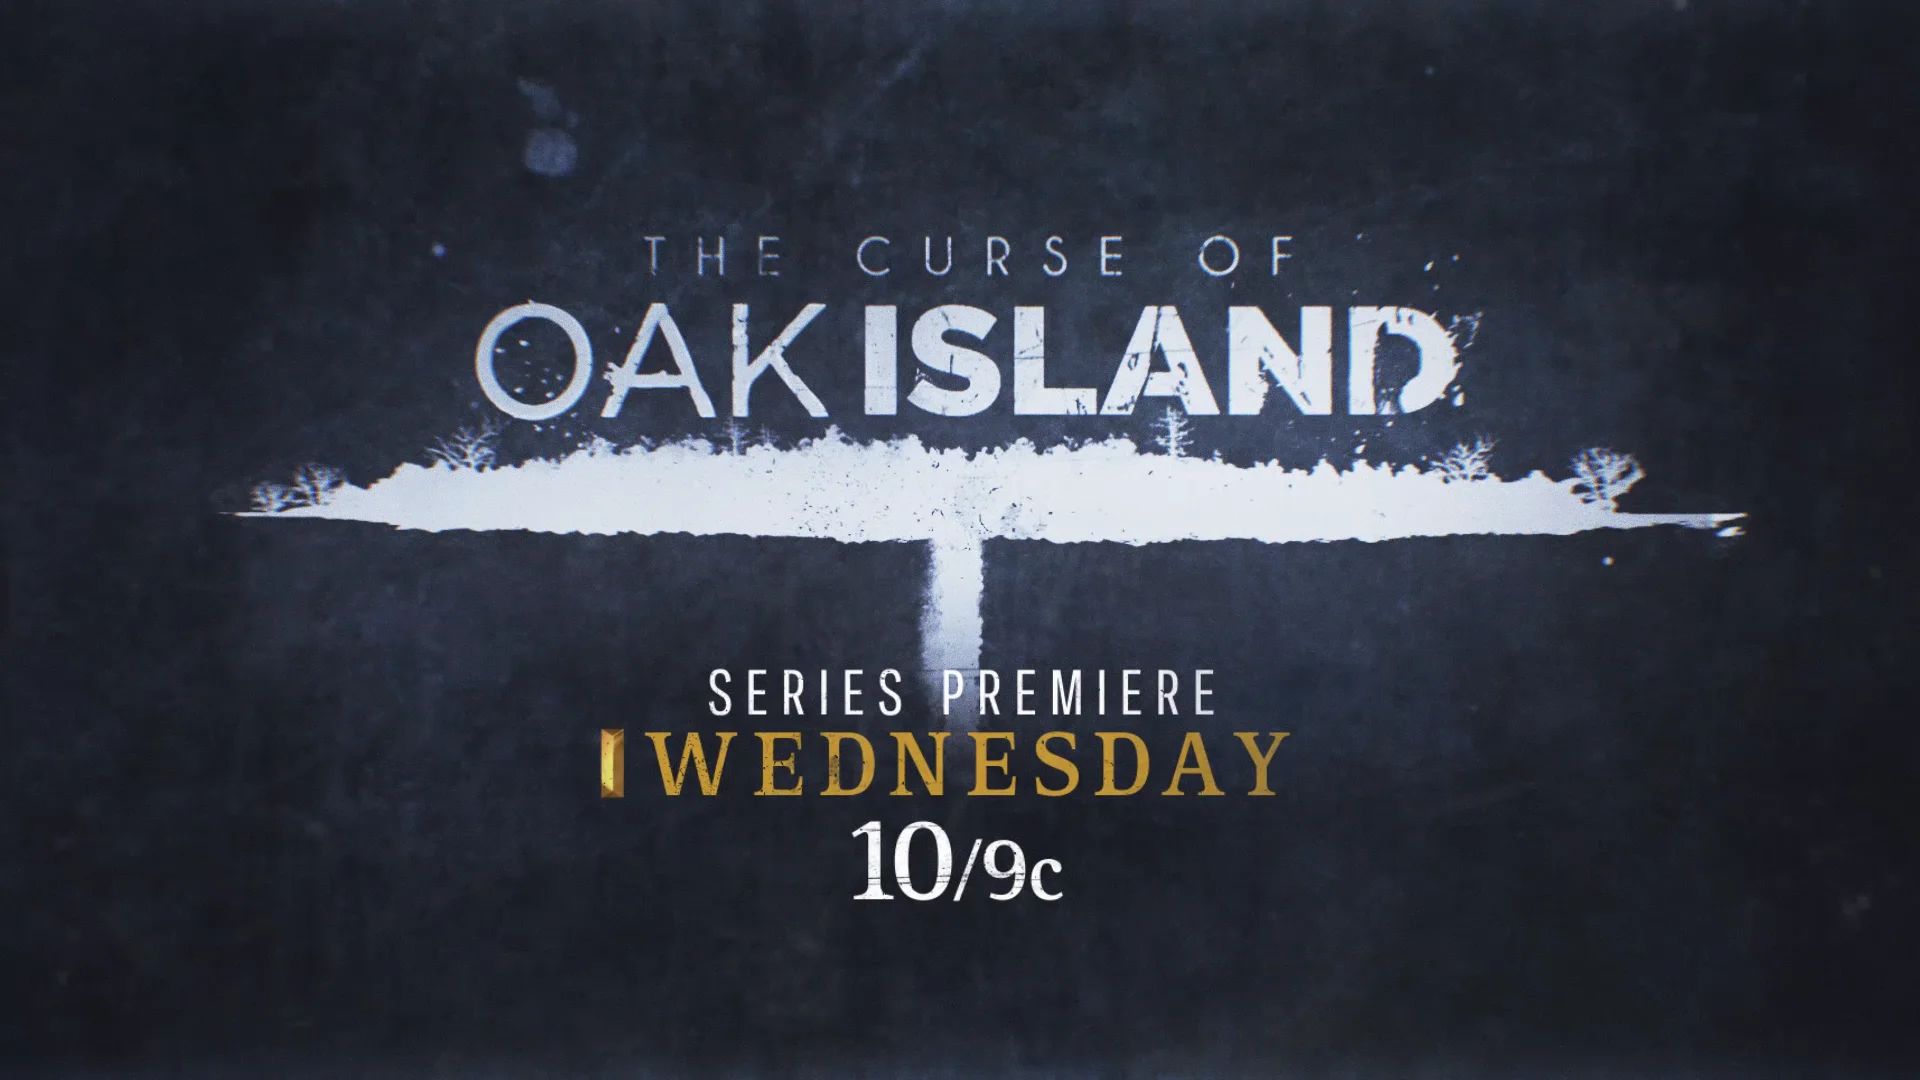 Watch The Curse of Oak Island Full Episodes, Video & More